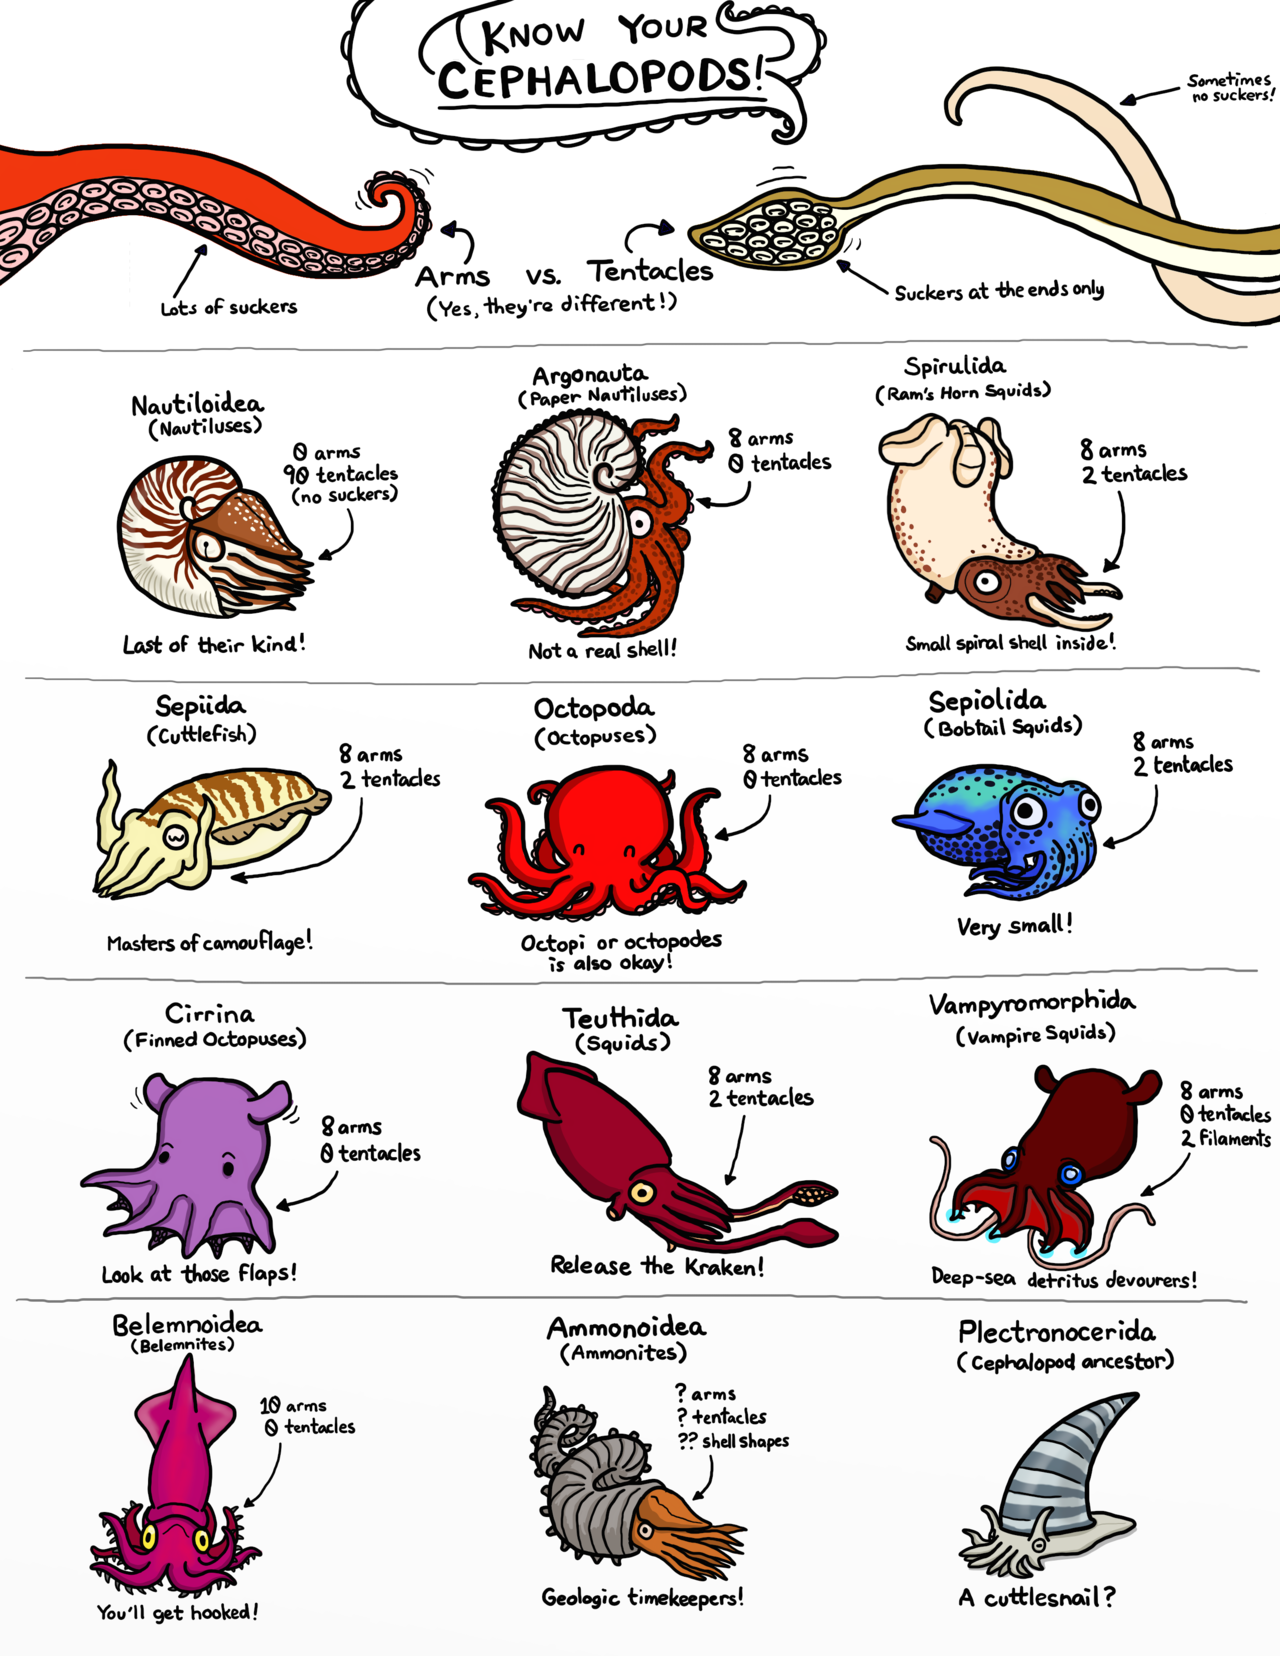 Know your Cephalopods